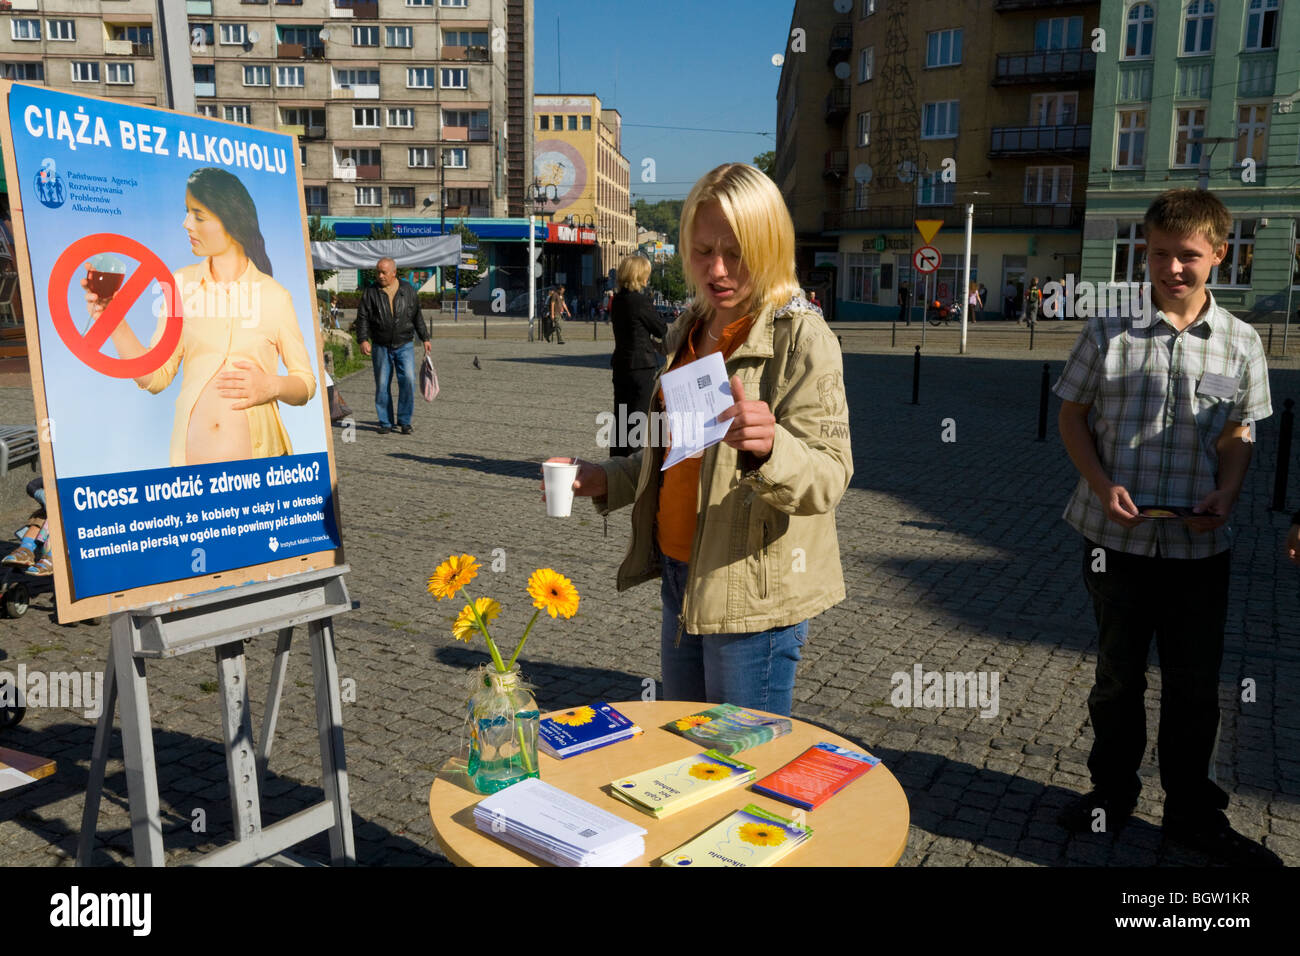 Public information / health advice roadshow to cut alcohol consumption by pregnant women in the town centre of Zabrze. Poland. Stock Photo